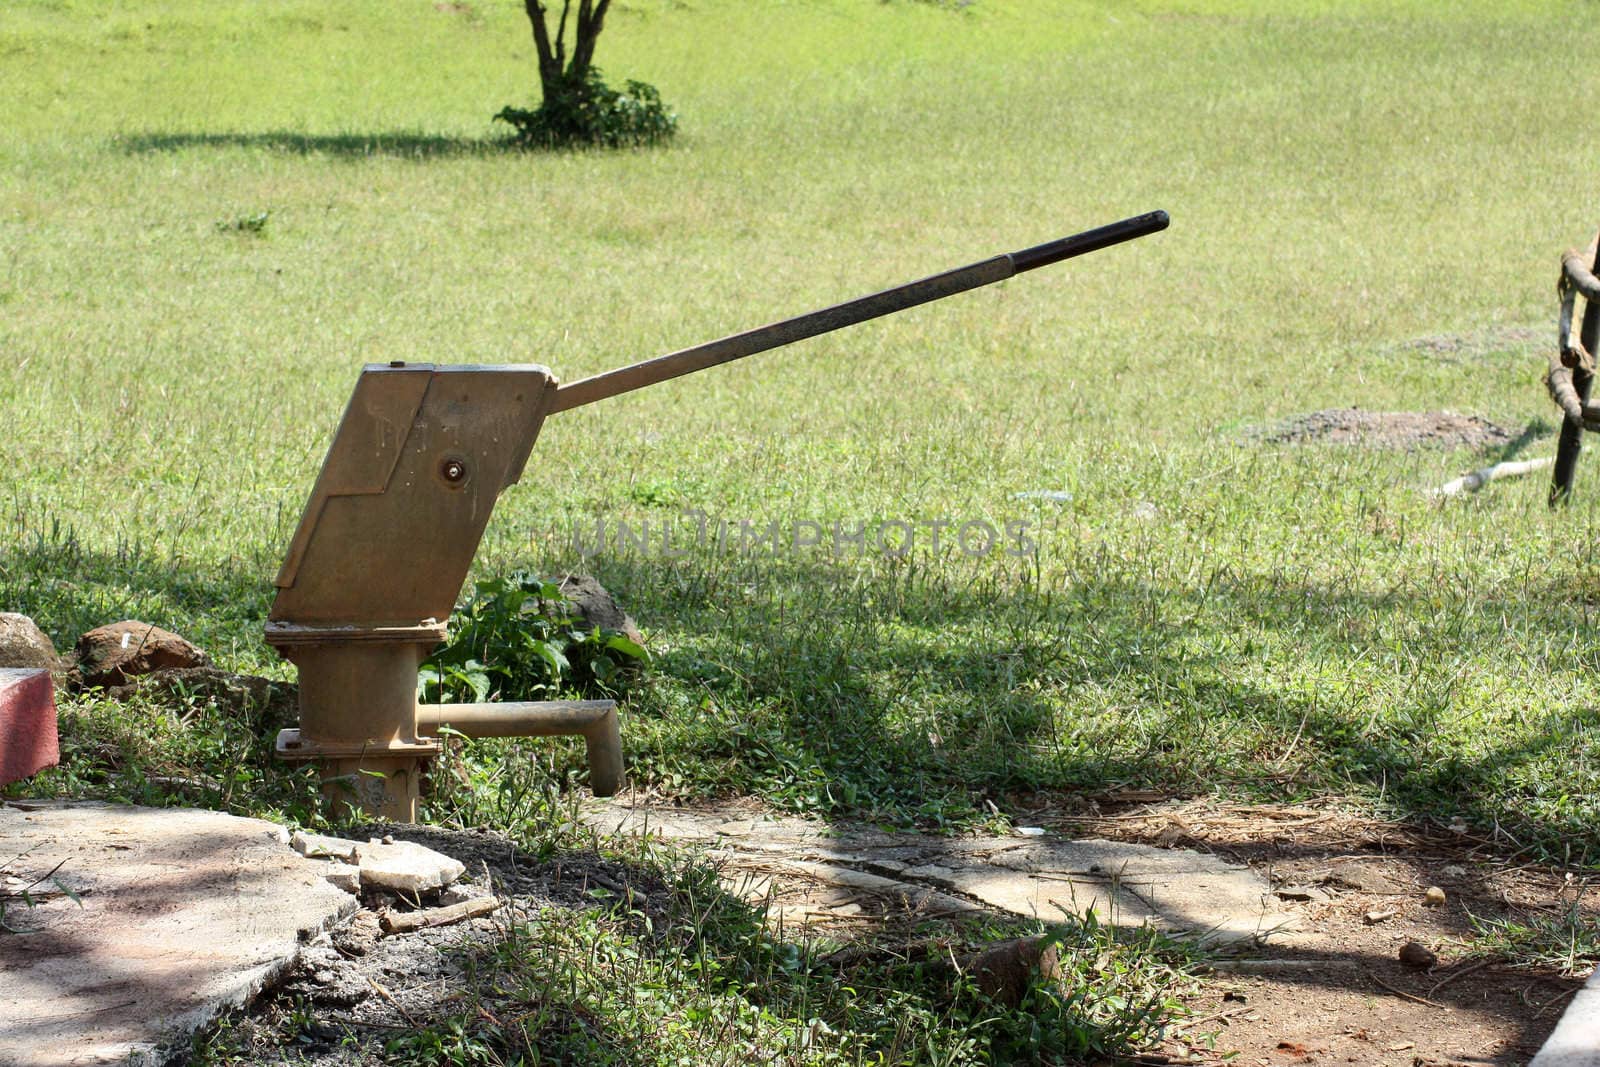 Water Hand Pump by thefinalmiracle